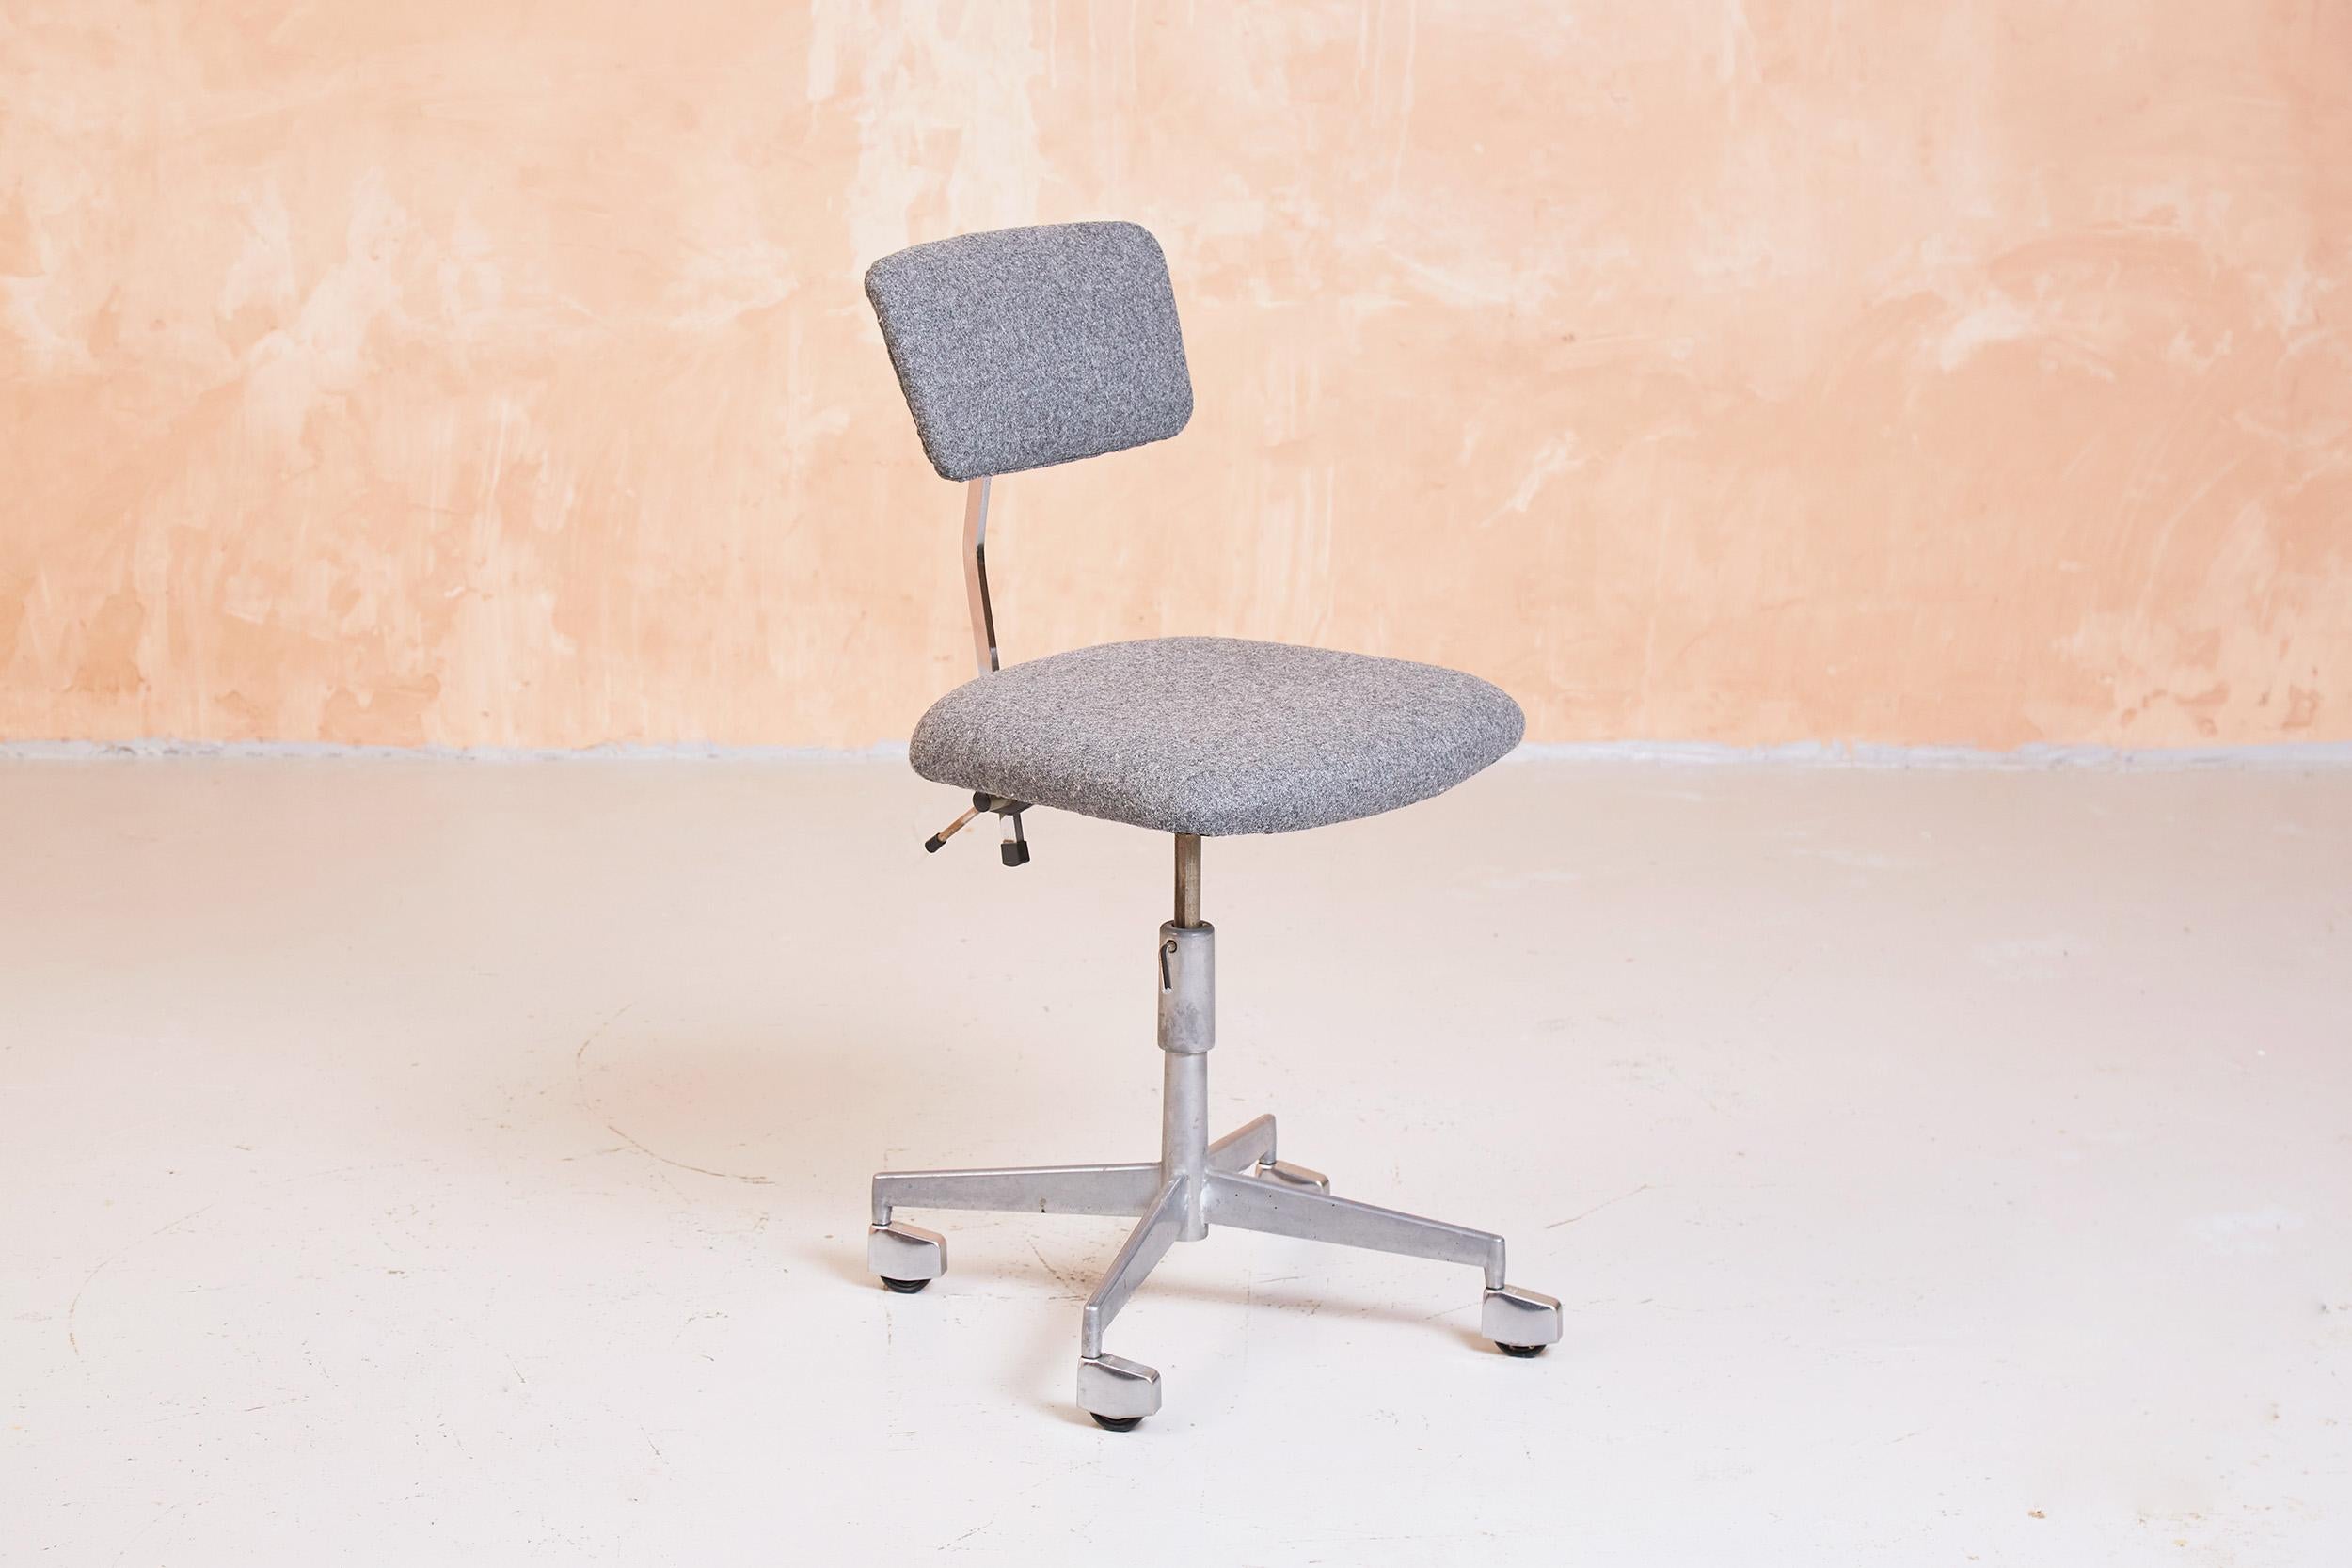 Original example of Jørgen Rasmussen’s iconic KEVI swivel chair designed in the mid 1950s and produced by Labofa.

The chair features adjustable seat and back rest height. The angle of the back rest is also adjustable.

Rasmussen later developed